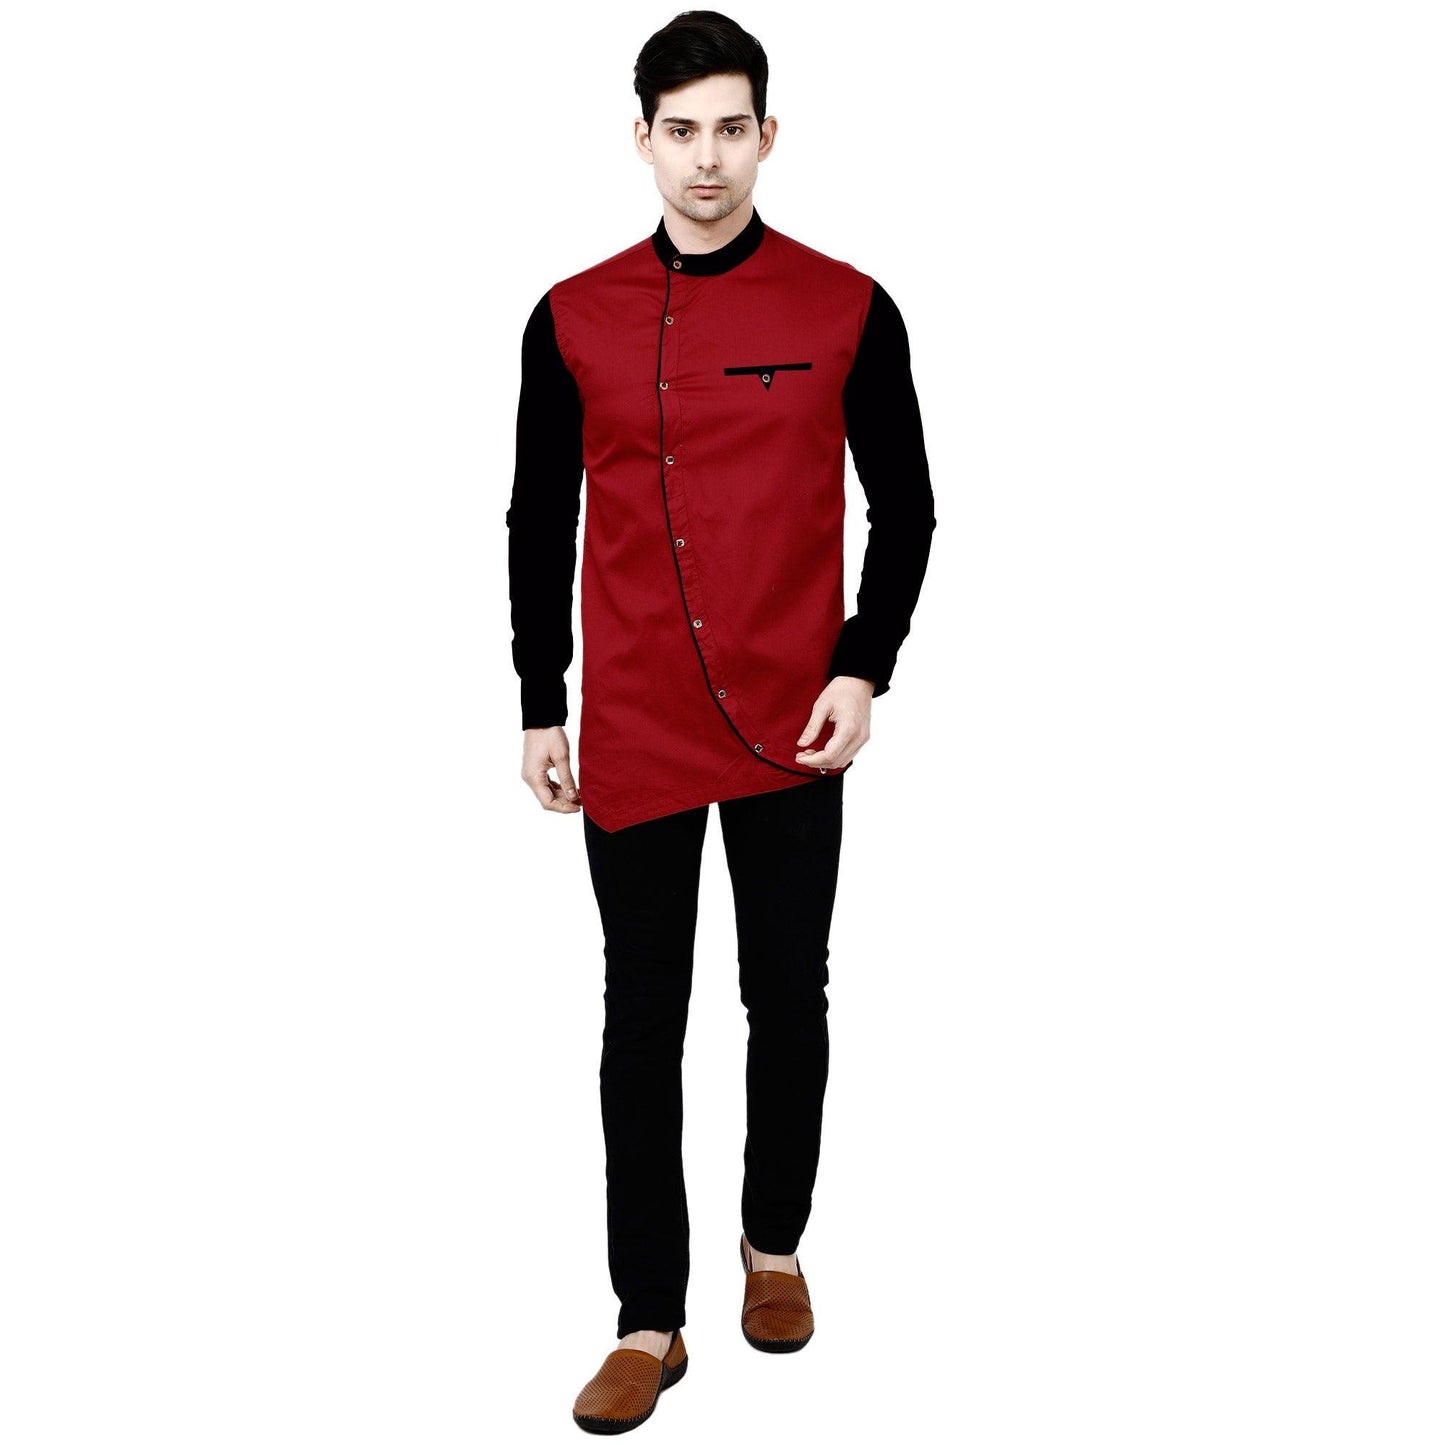 UDFABRIC Men’s Cotton Curve Full Sleeve Short Kurta - Skyblue - UD FABRIC - Your Style our Design